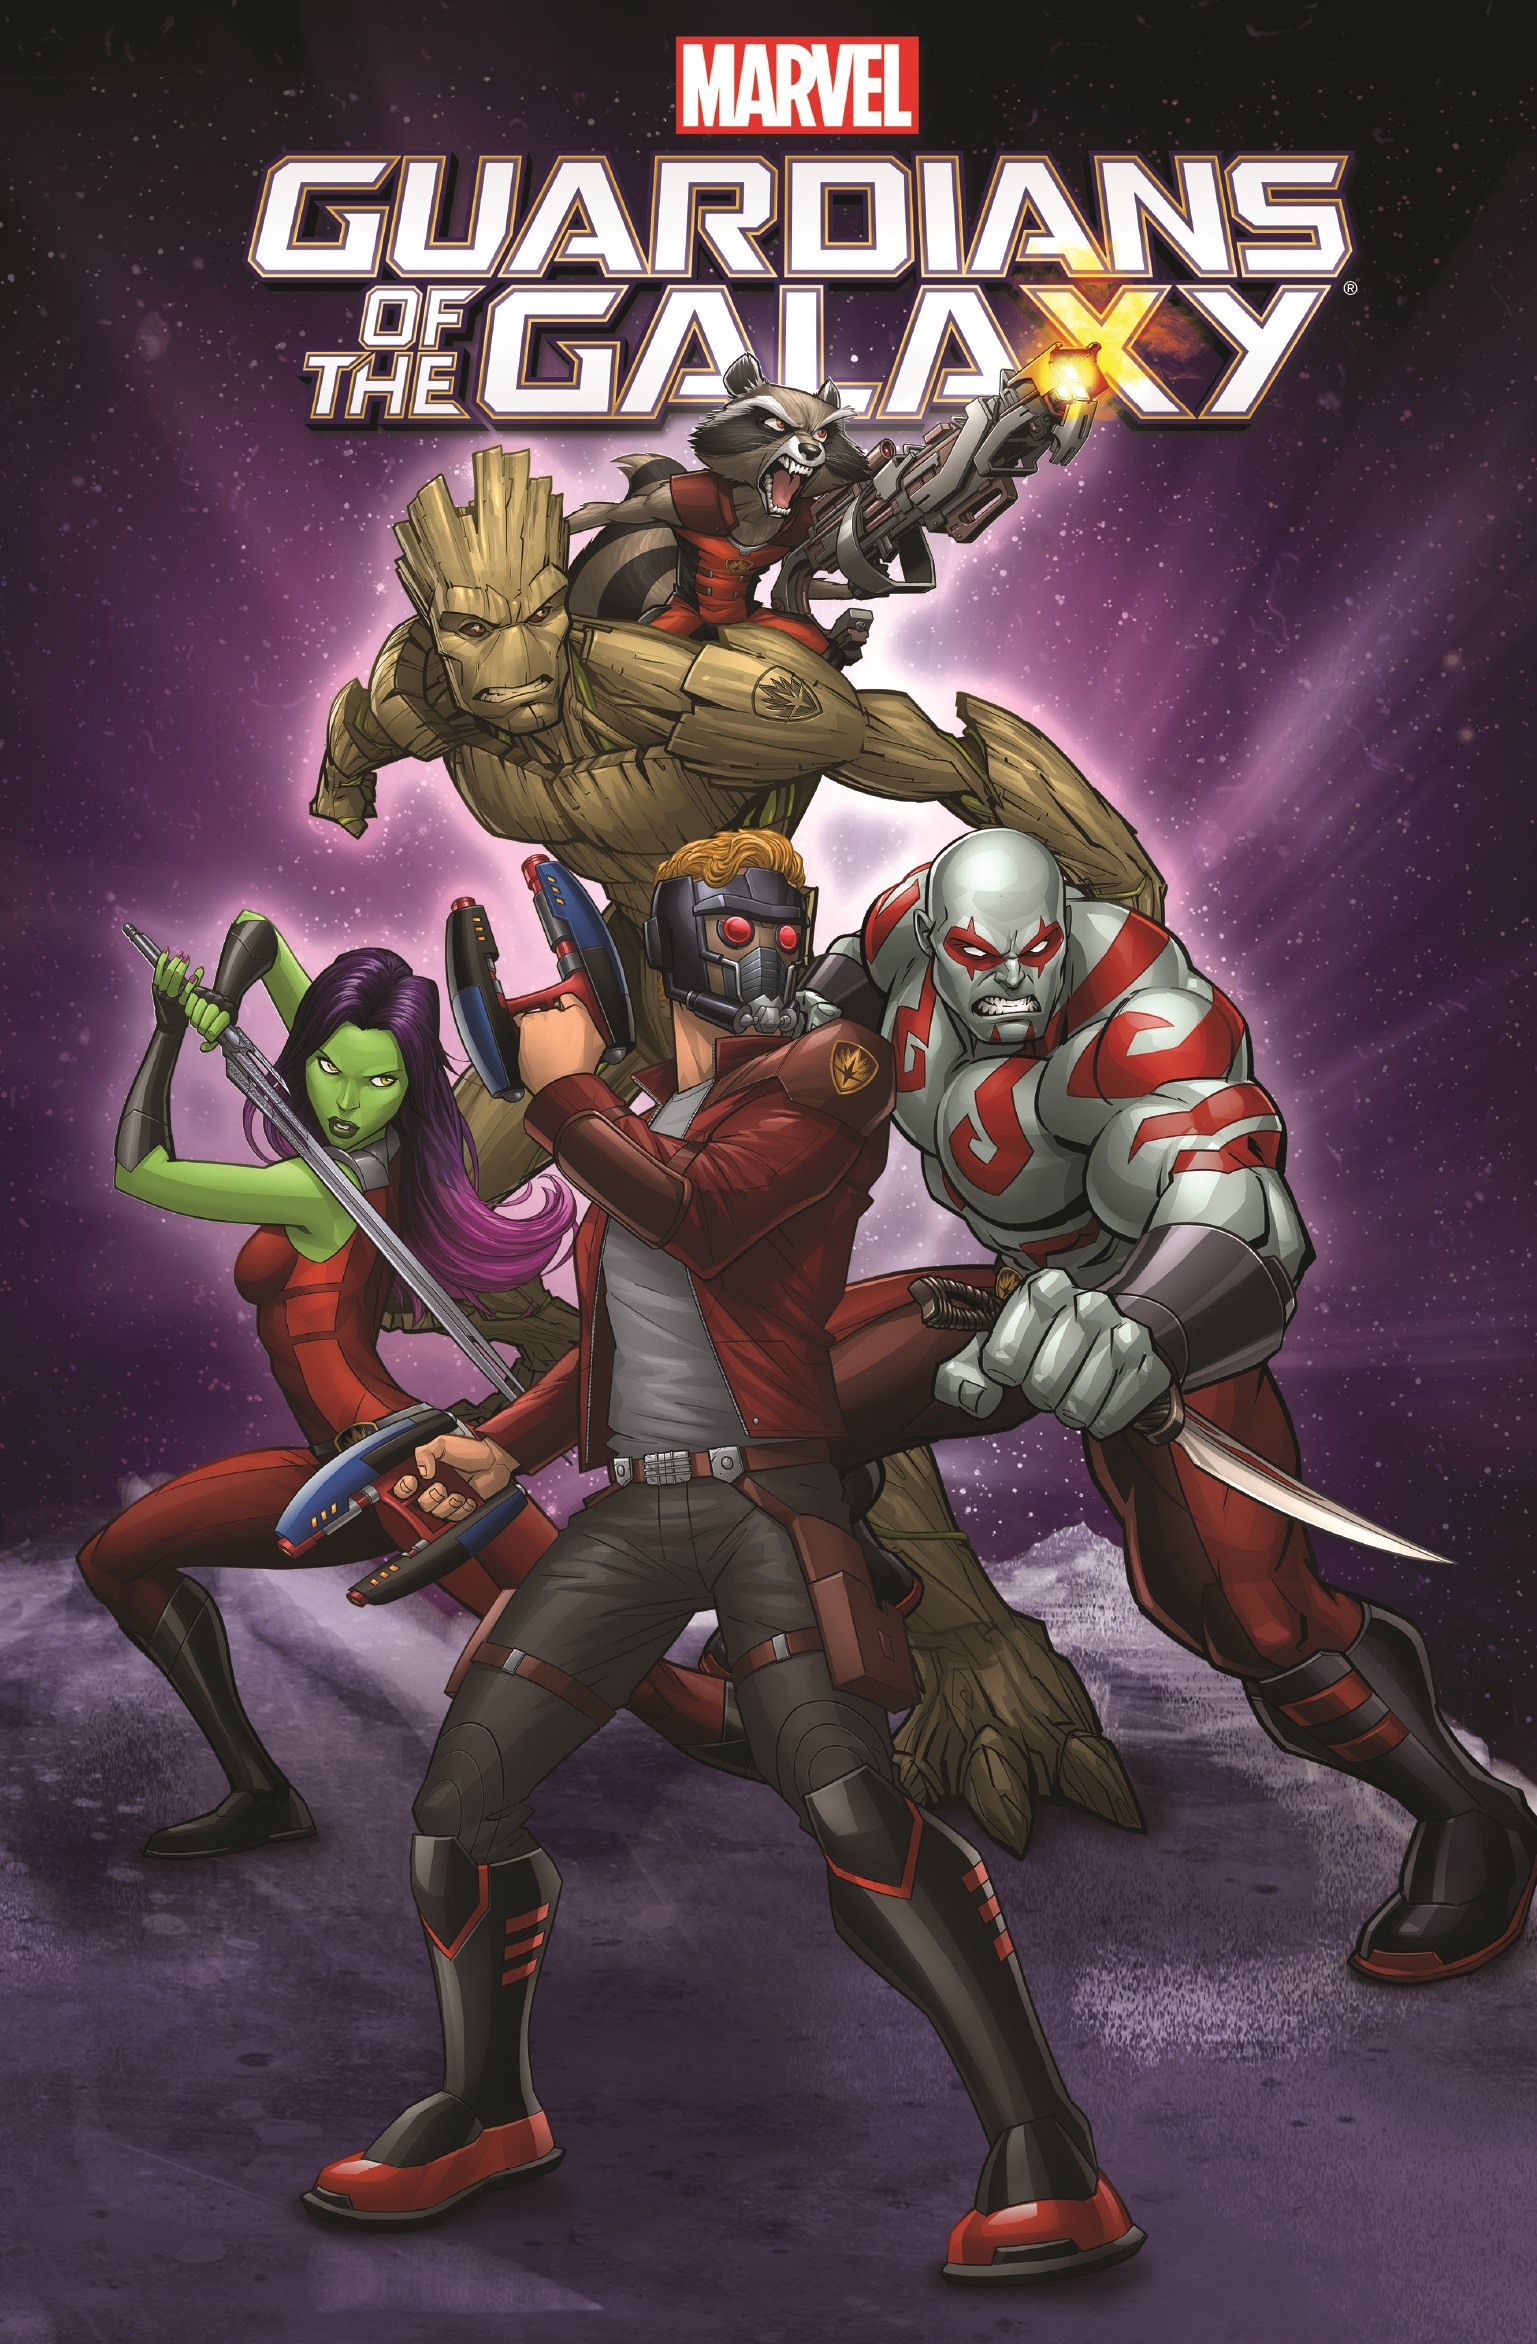 MARVEL UNIVERSE GUARDIANS OF THE GALAXY VOL. 5 DIGEST (Digest)